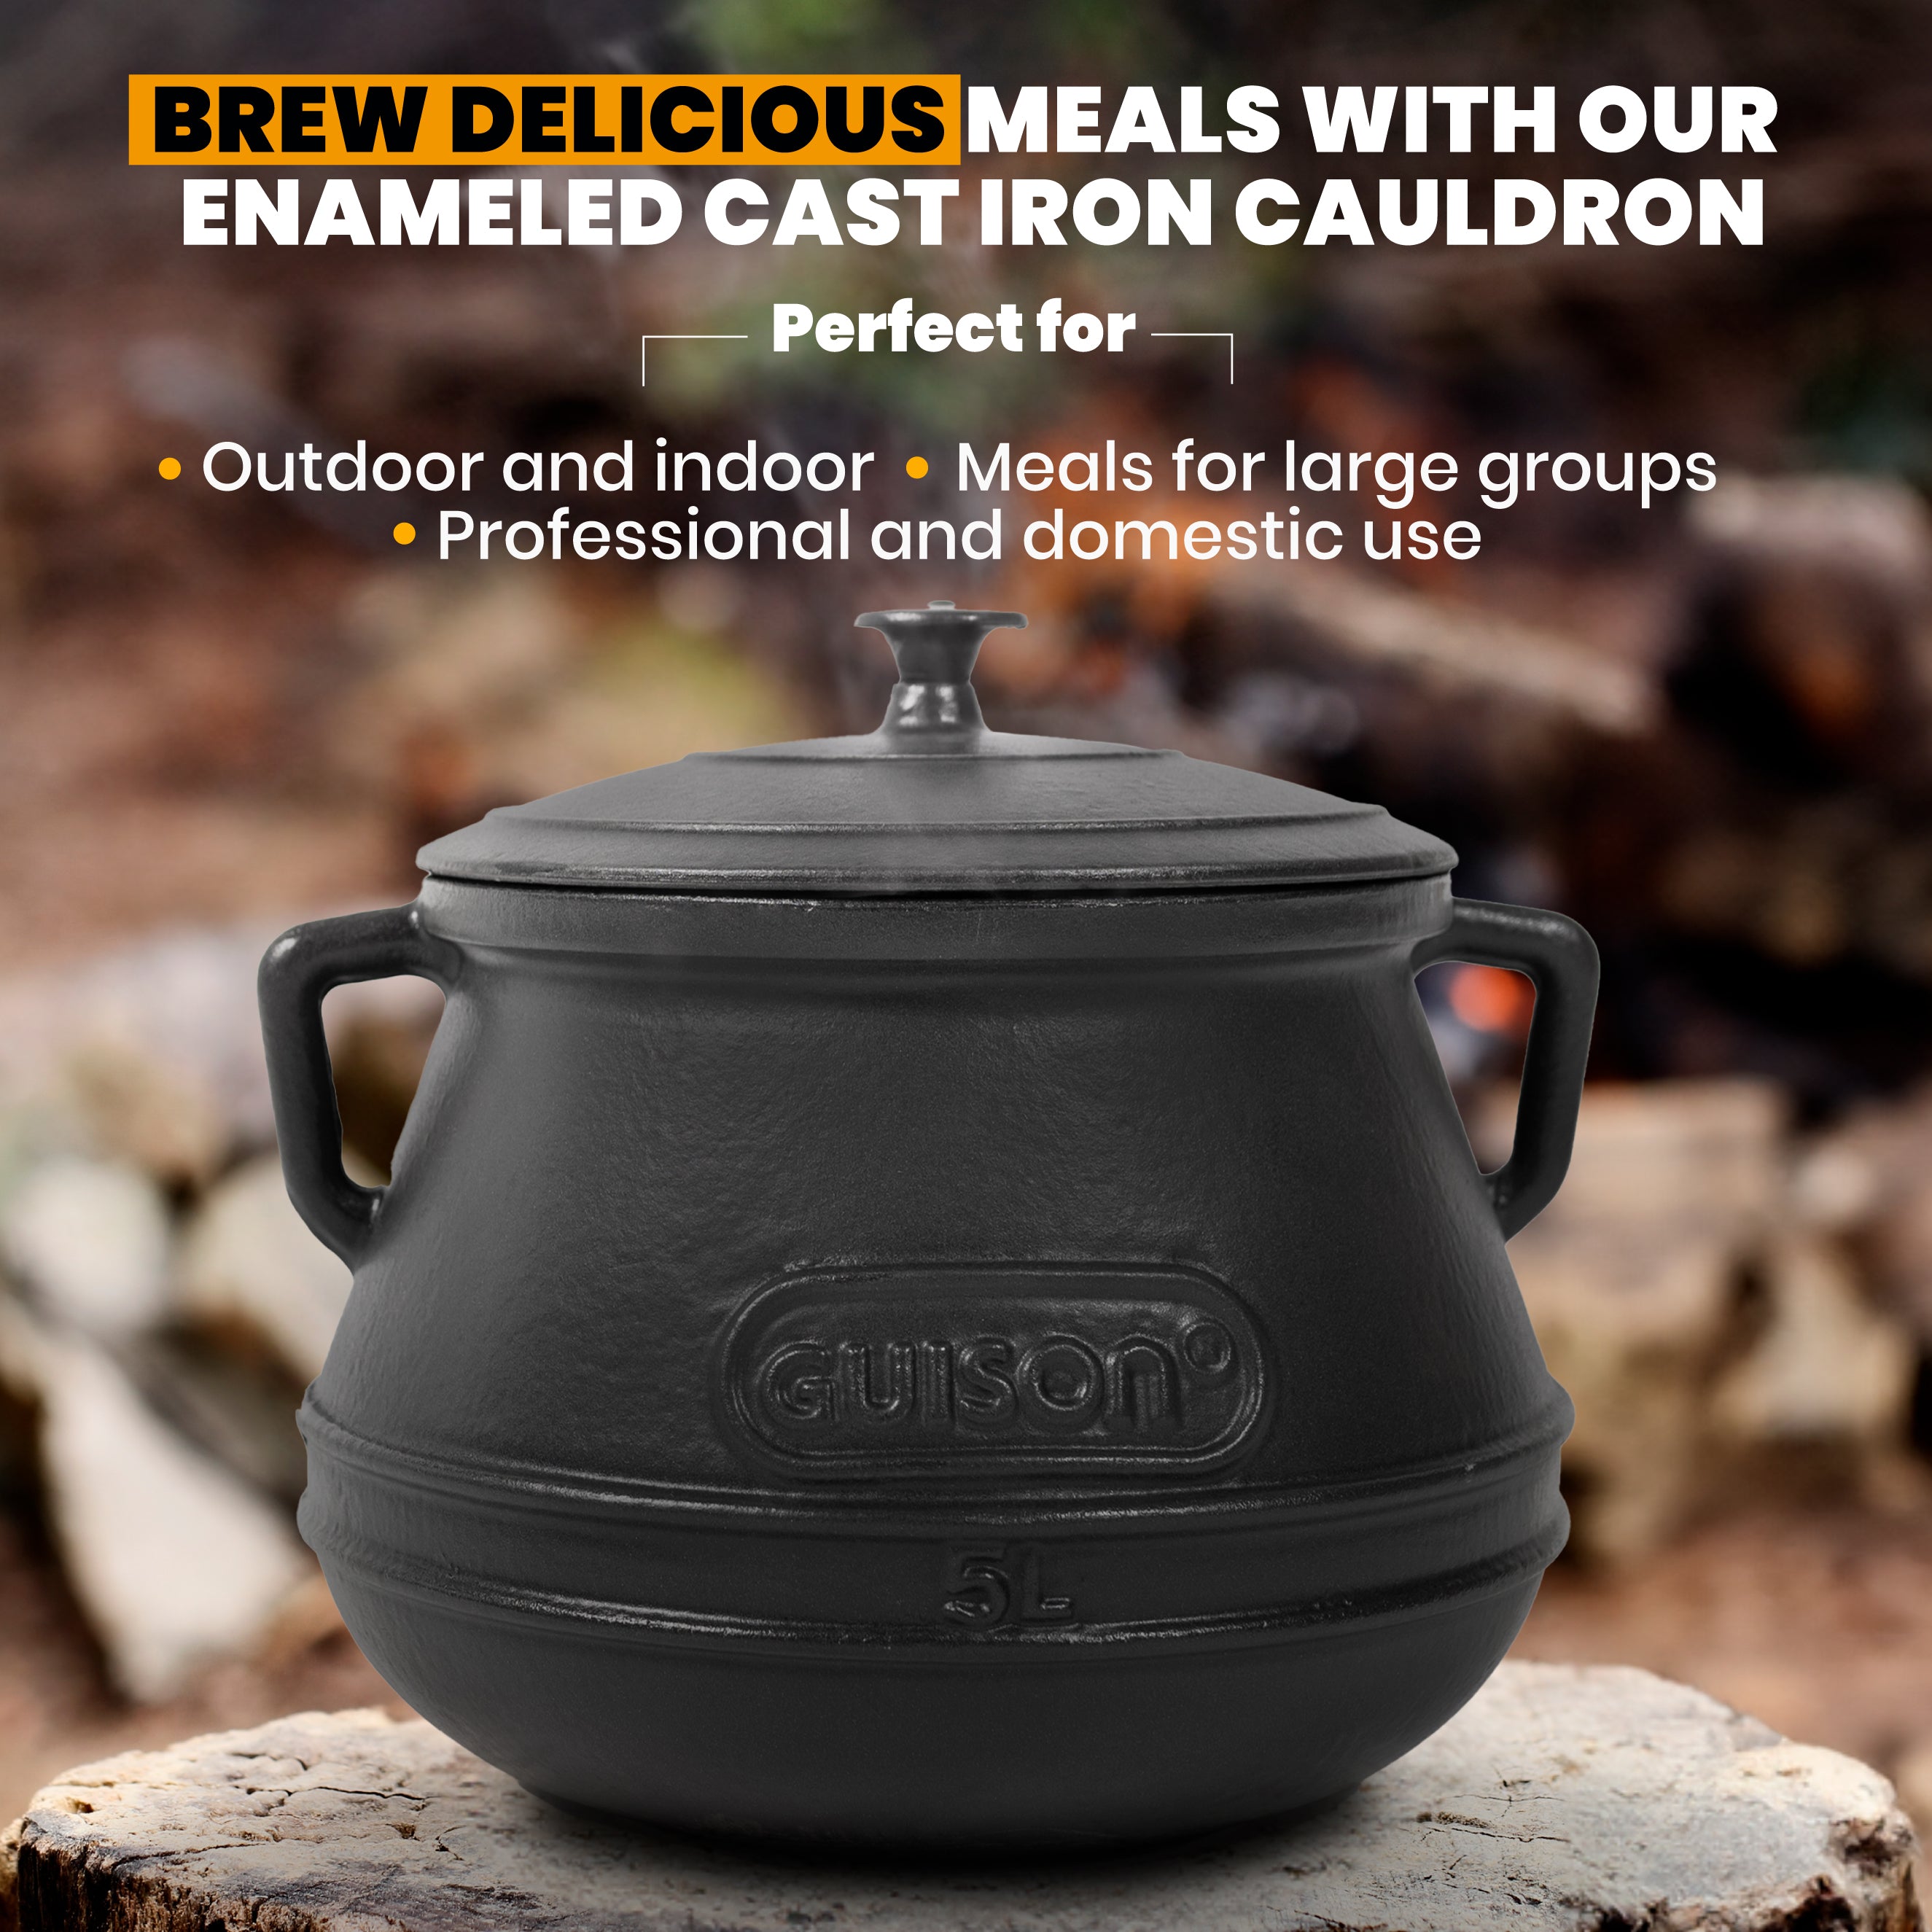 Cauldron Cast Iron | Oven Pot With Lid| Stock Pot for Stews, Beans, Soups | Perfect for Professional and Domestic Use | 20 Servings | 5.8QT/5L